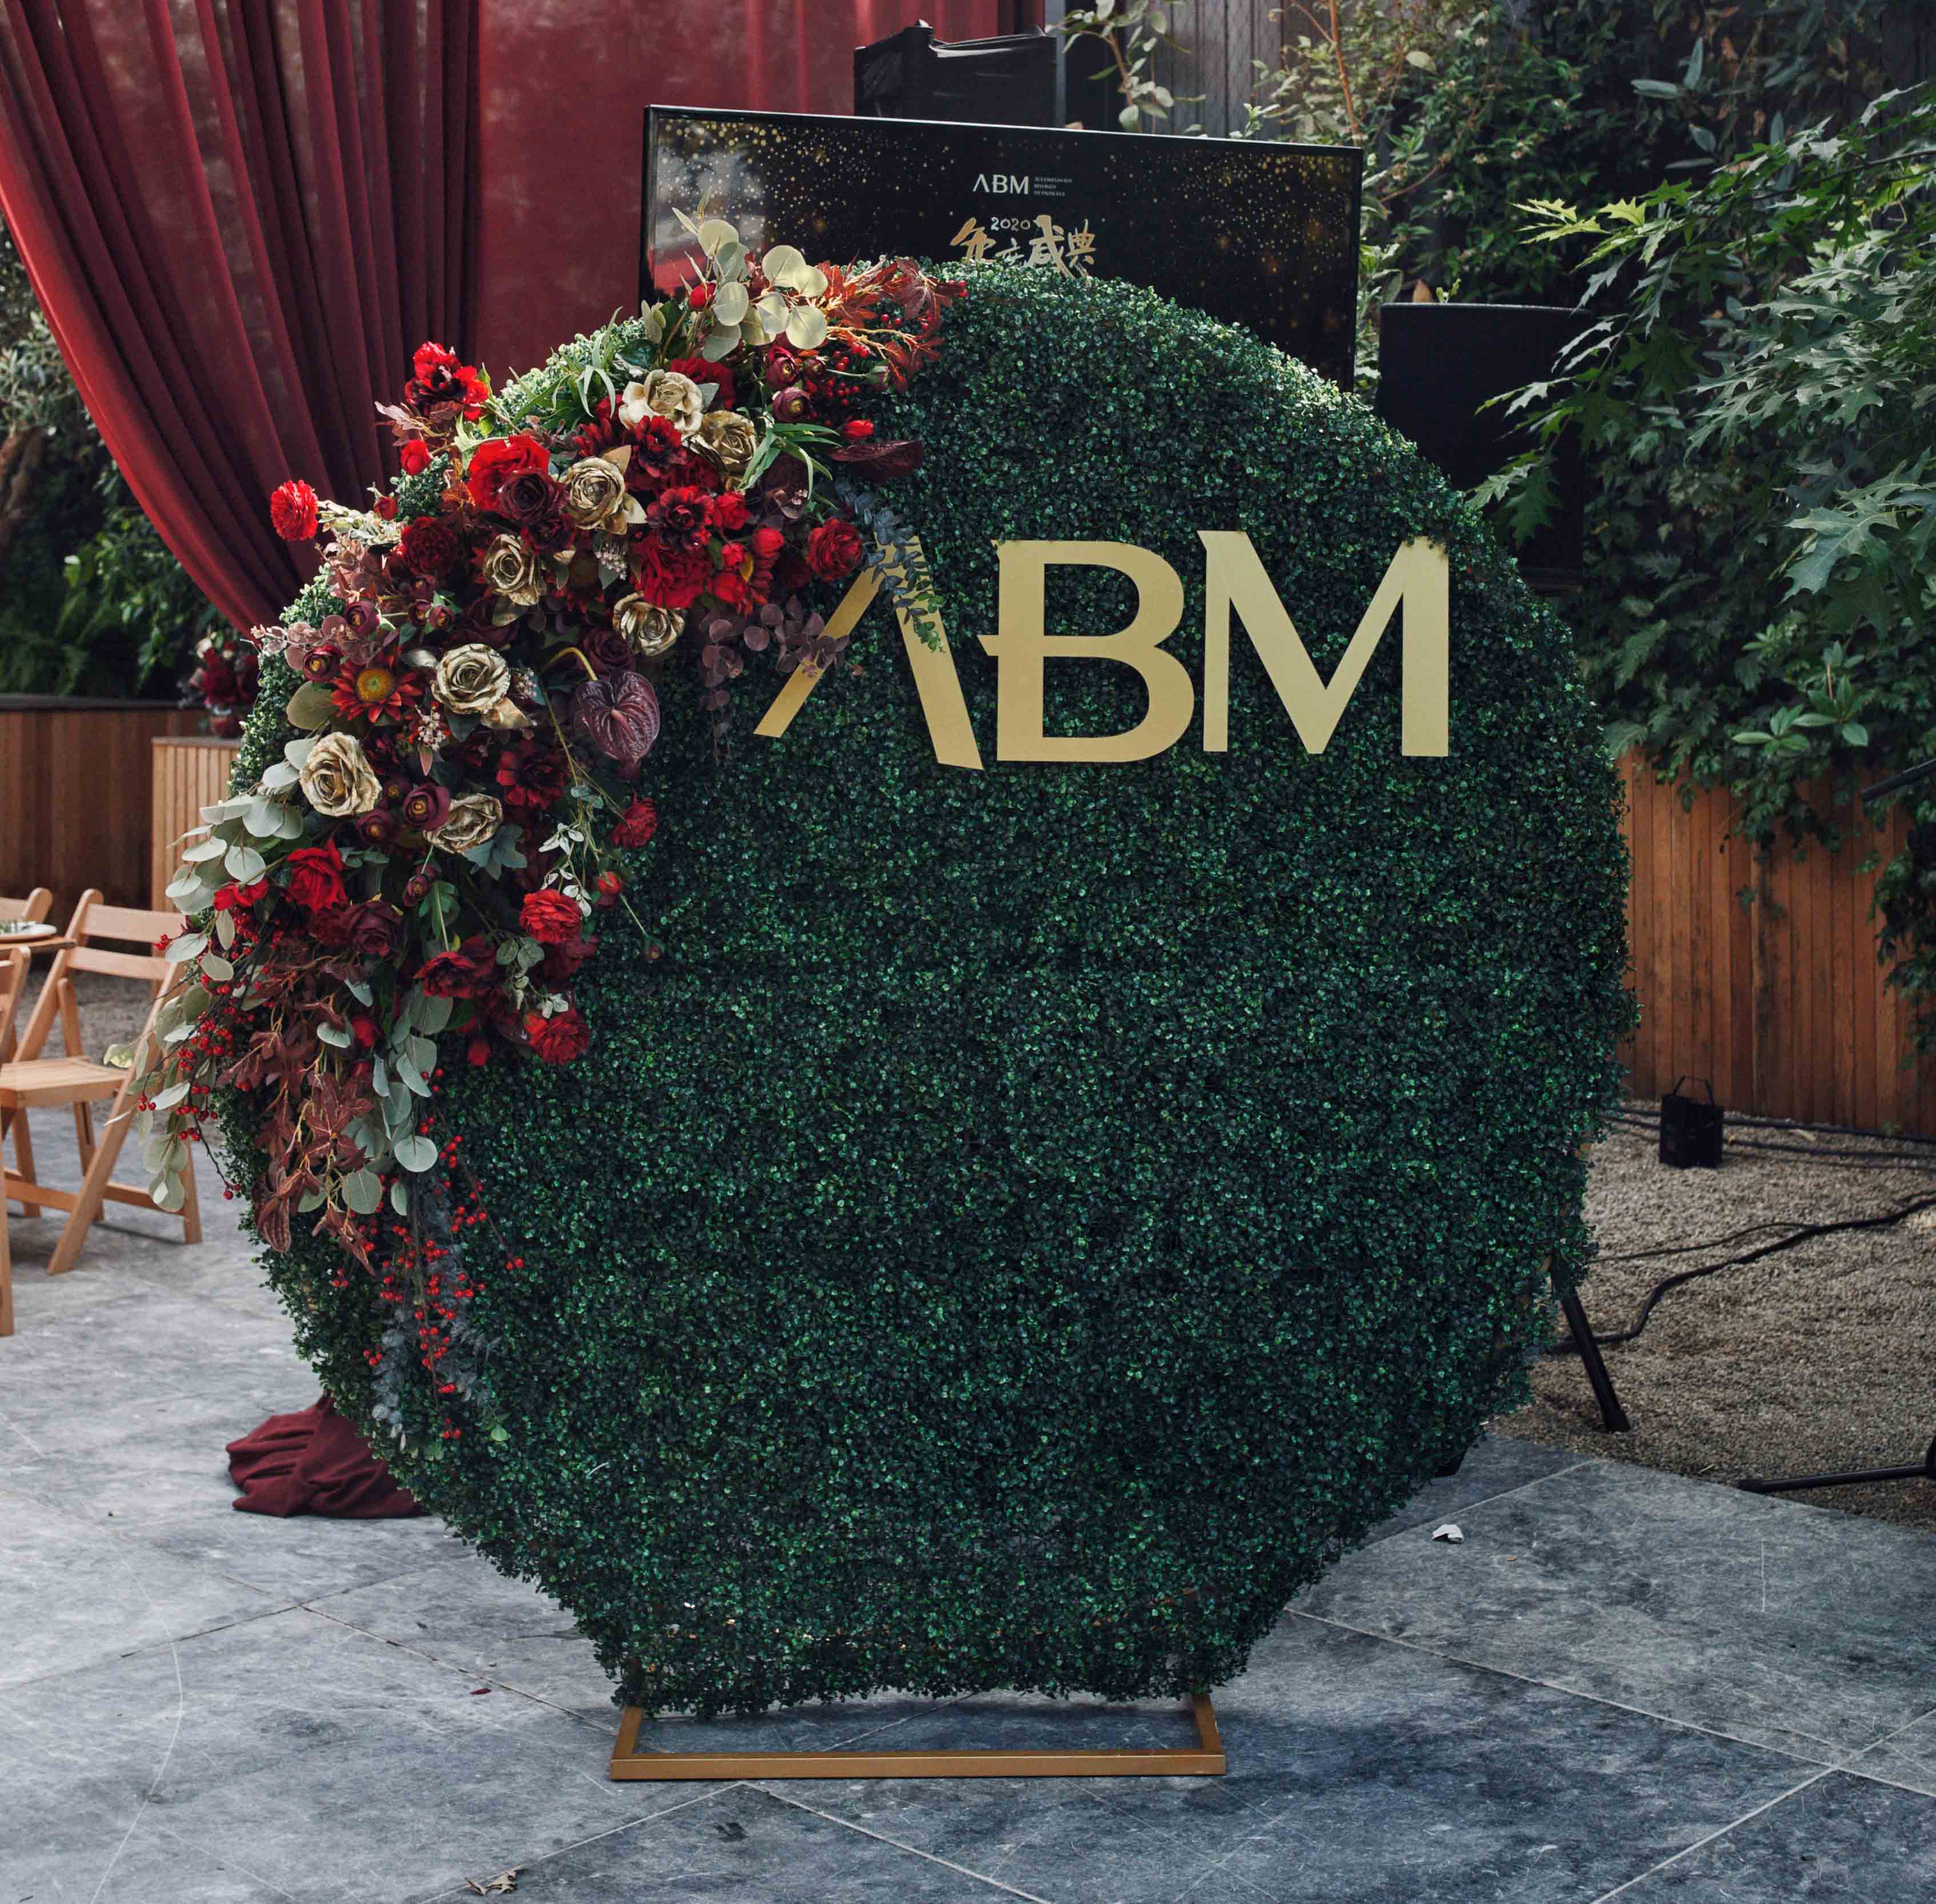 Hedge Backdrop by Luxe Dream Event Hire / Flowers by Luxe Dream Floral Studio for ABM